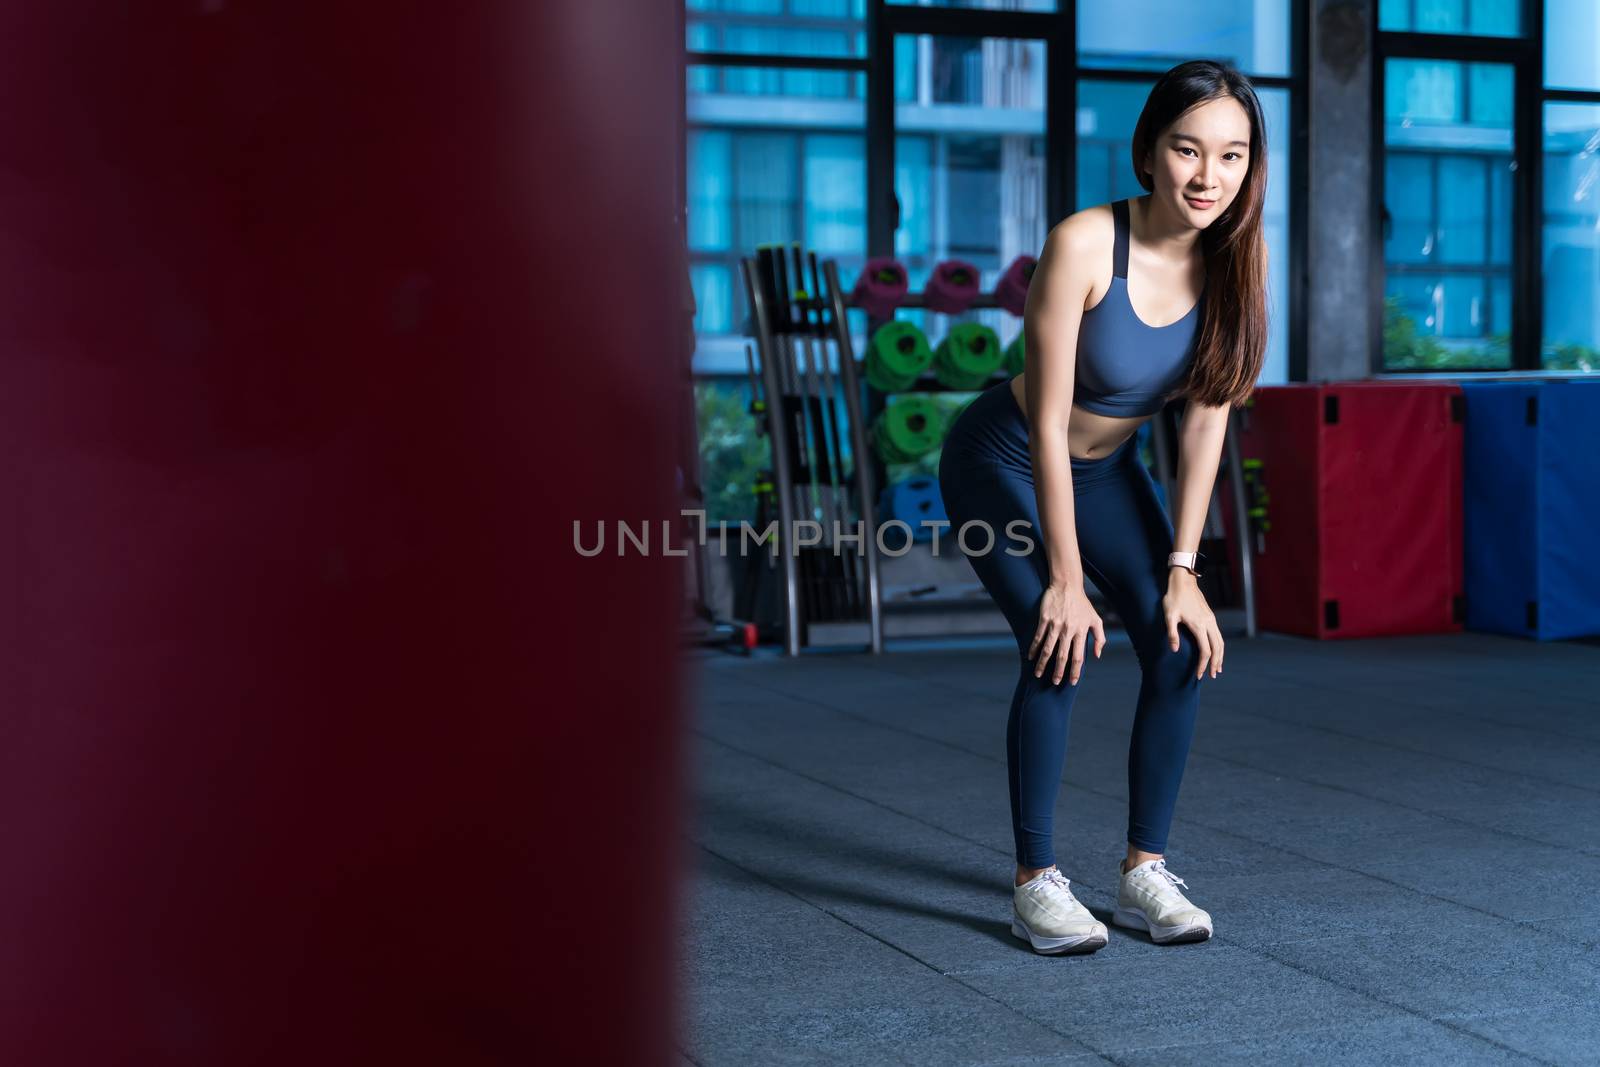 Asian Women rest during exercise. She's holding her hand at Knee by Boophuket